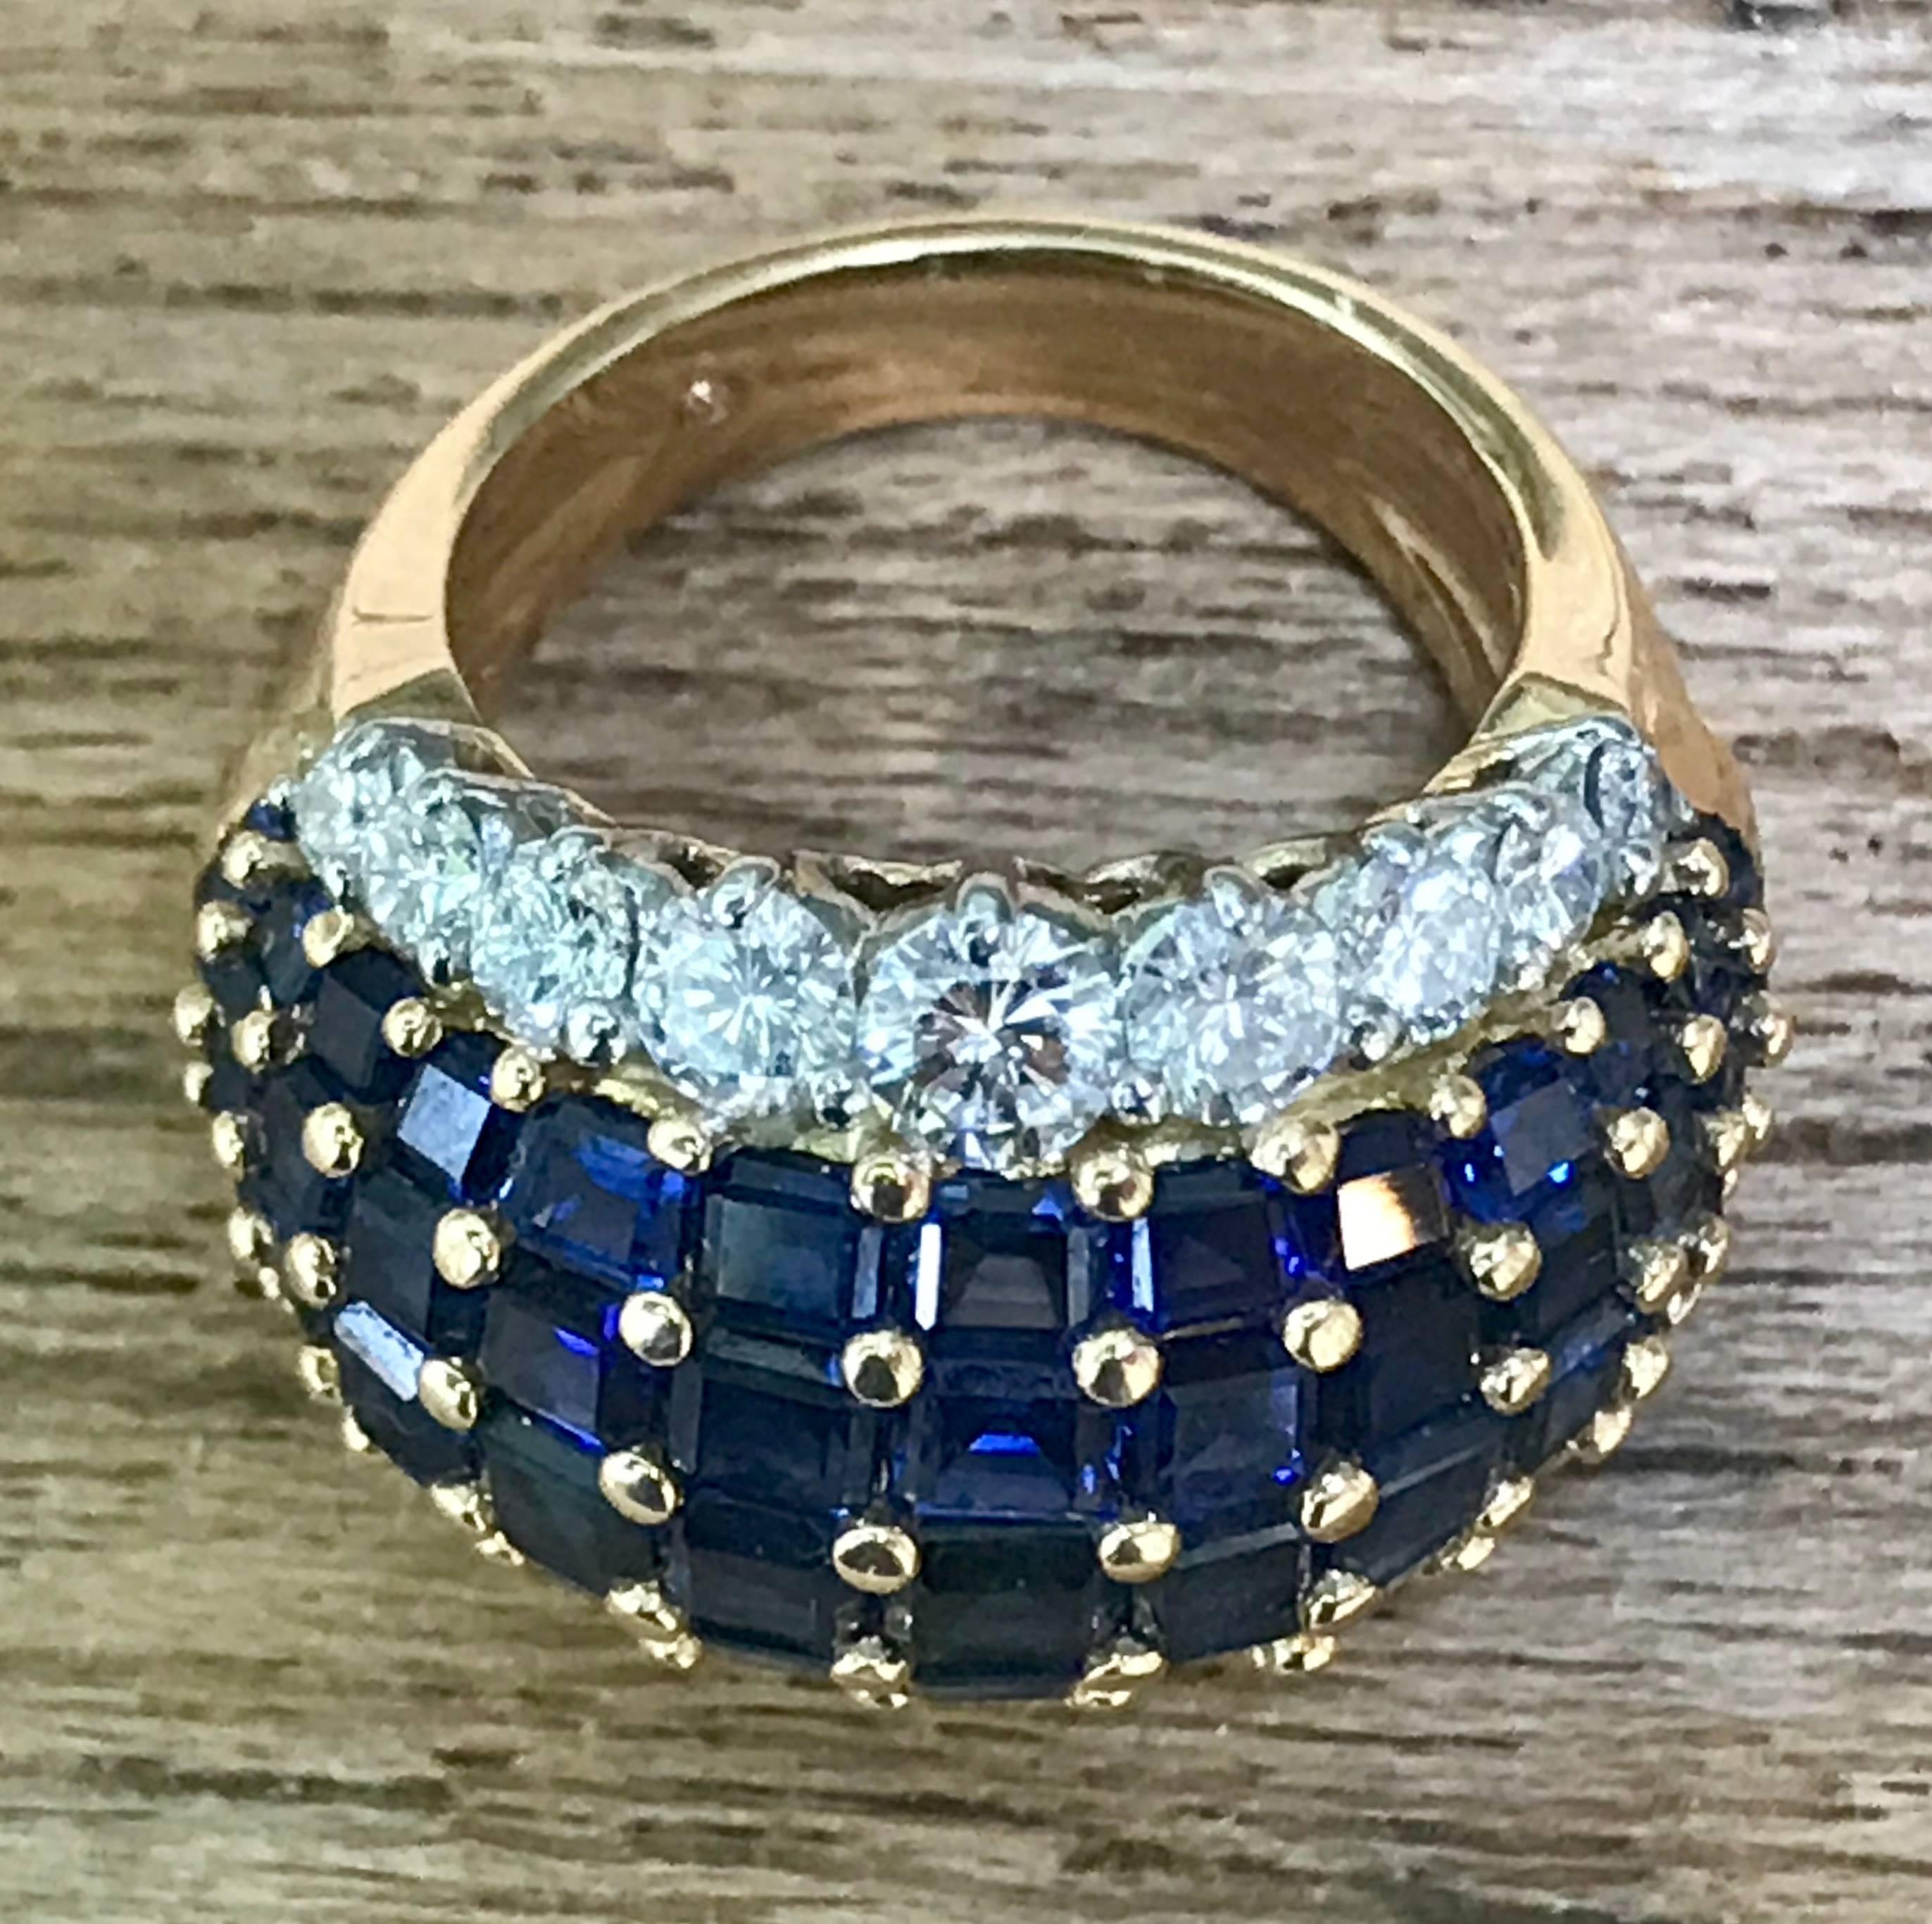 Exceptional American sapphire and diamond ring mounted in 18-karat gold and platinum by Oscar Heyman Brothers, circa 1960. Hallmarked and numbered HB36709.
Size 6.5.